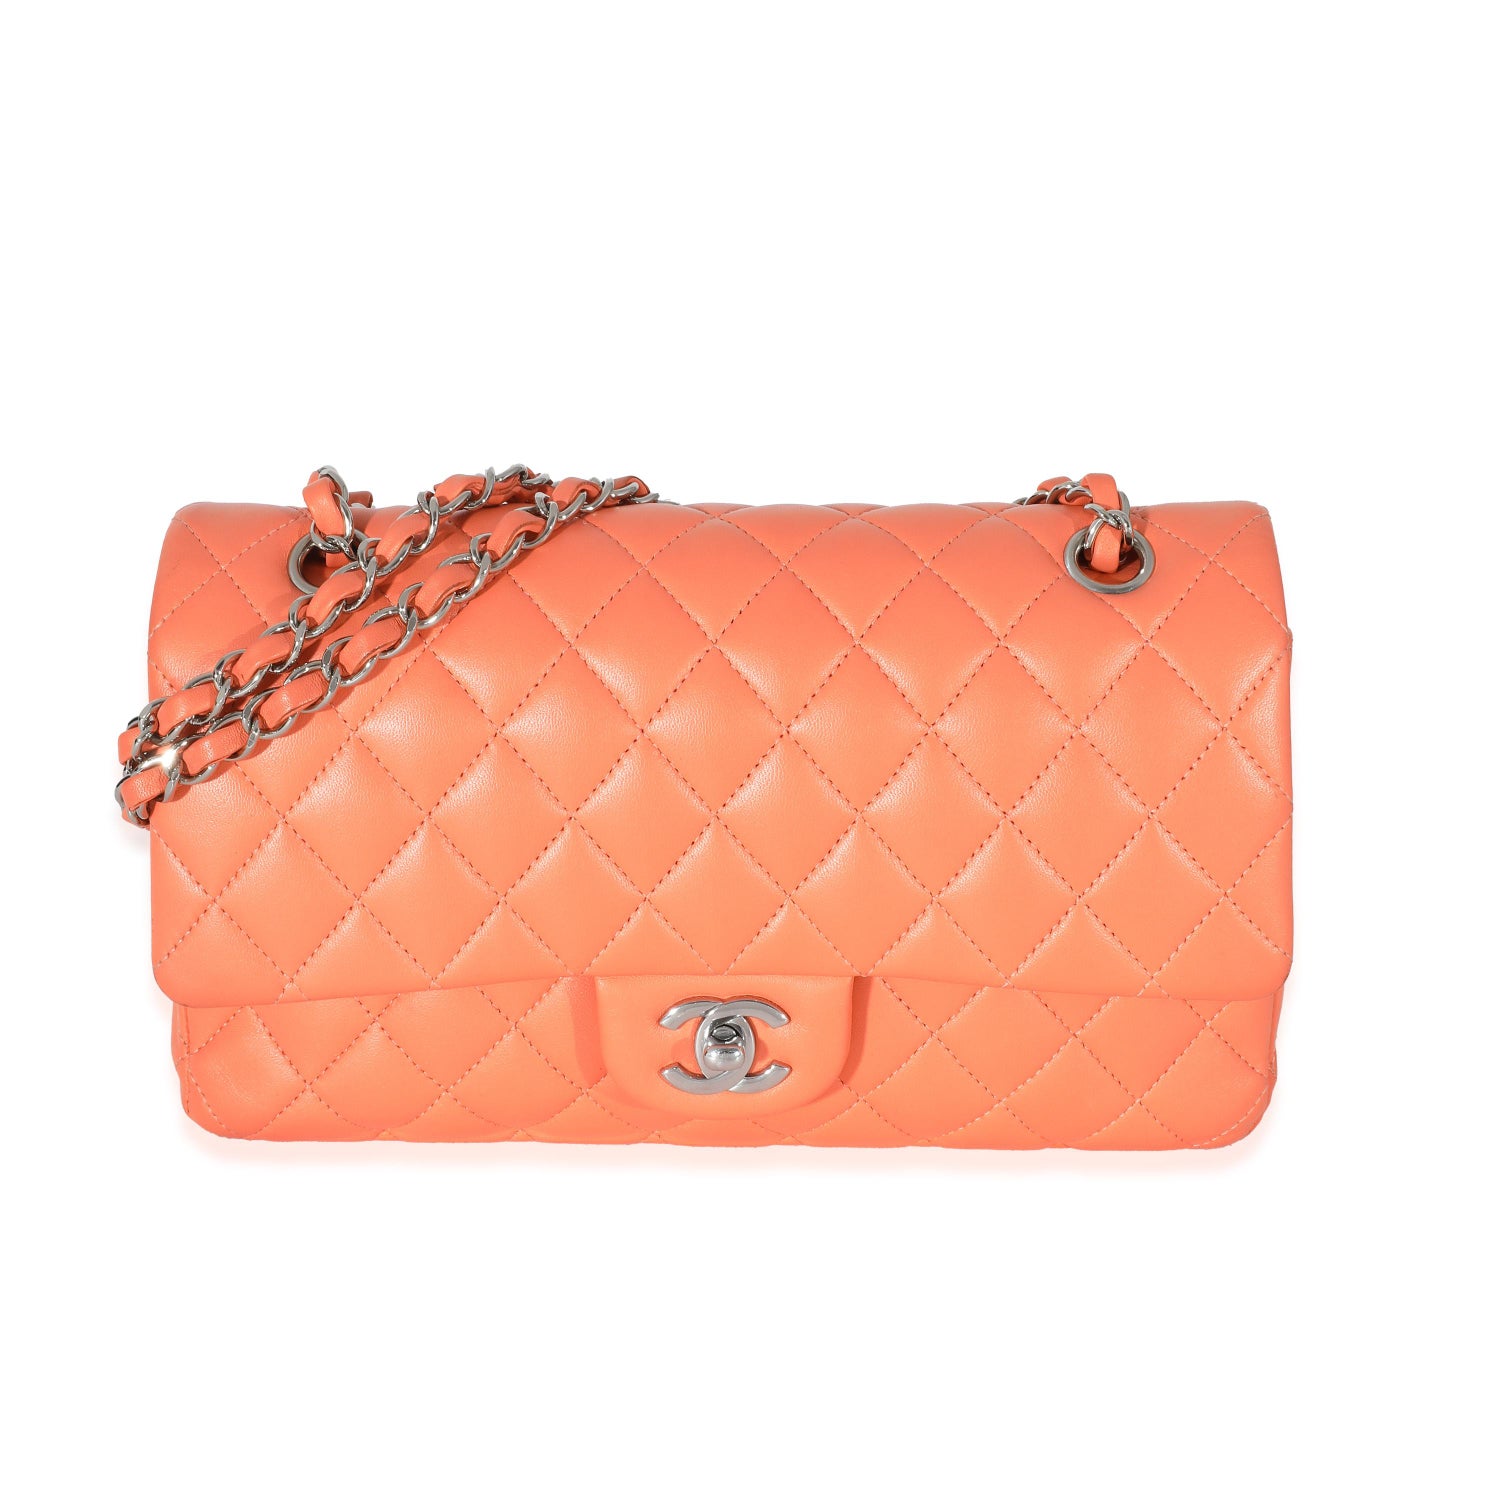 Chanel Classic Jumbo Double Flap Bag in Light Orange & Pink Patent Leather  with Silver-Tone Metal Hardware